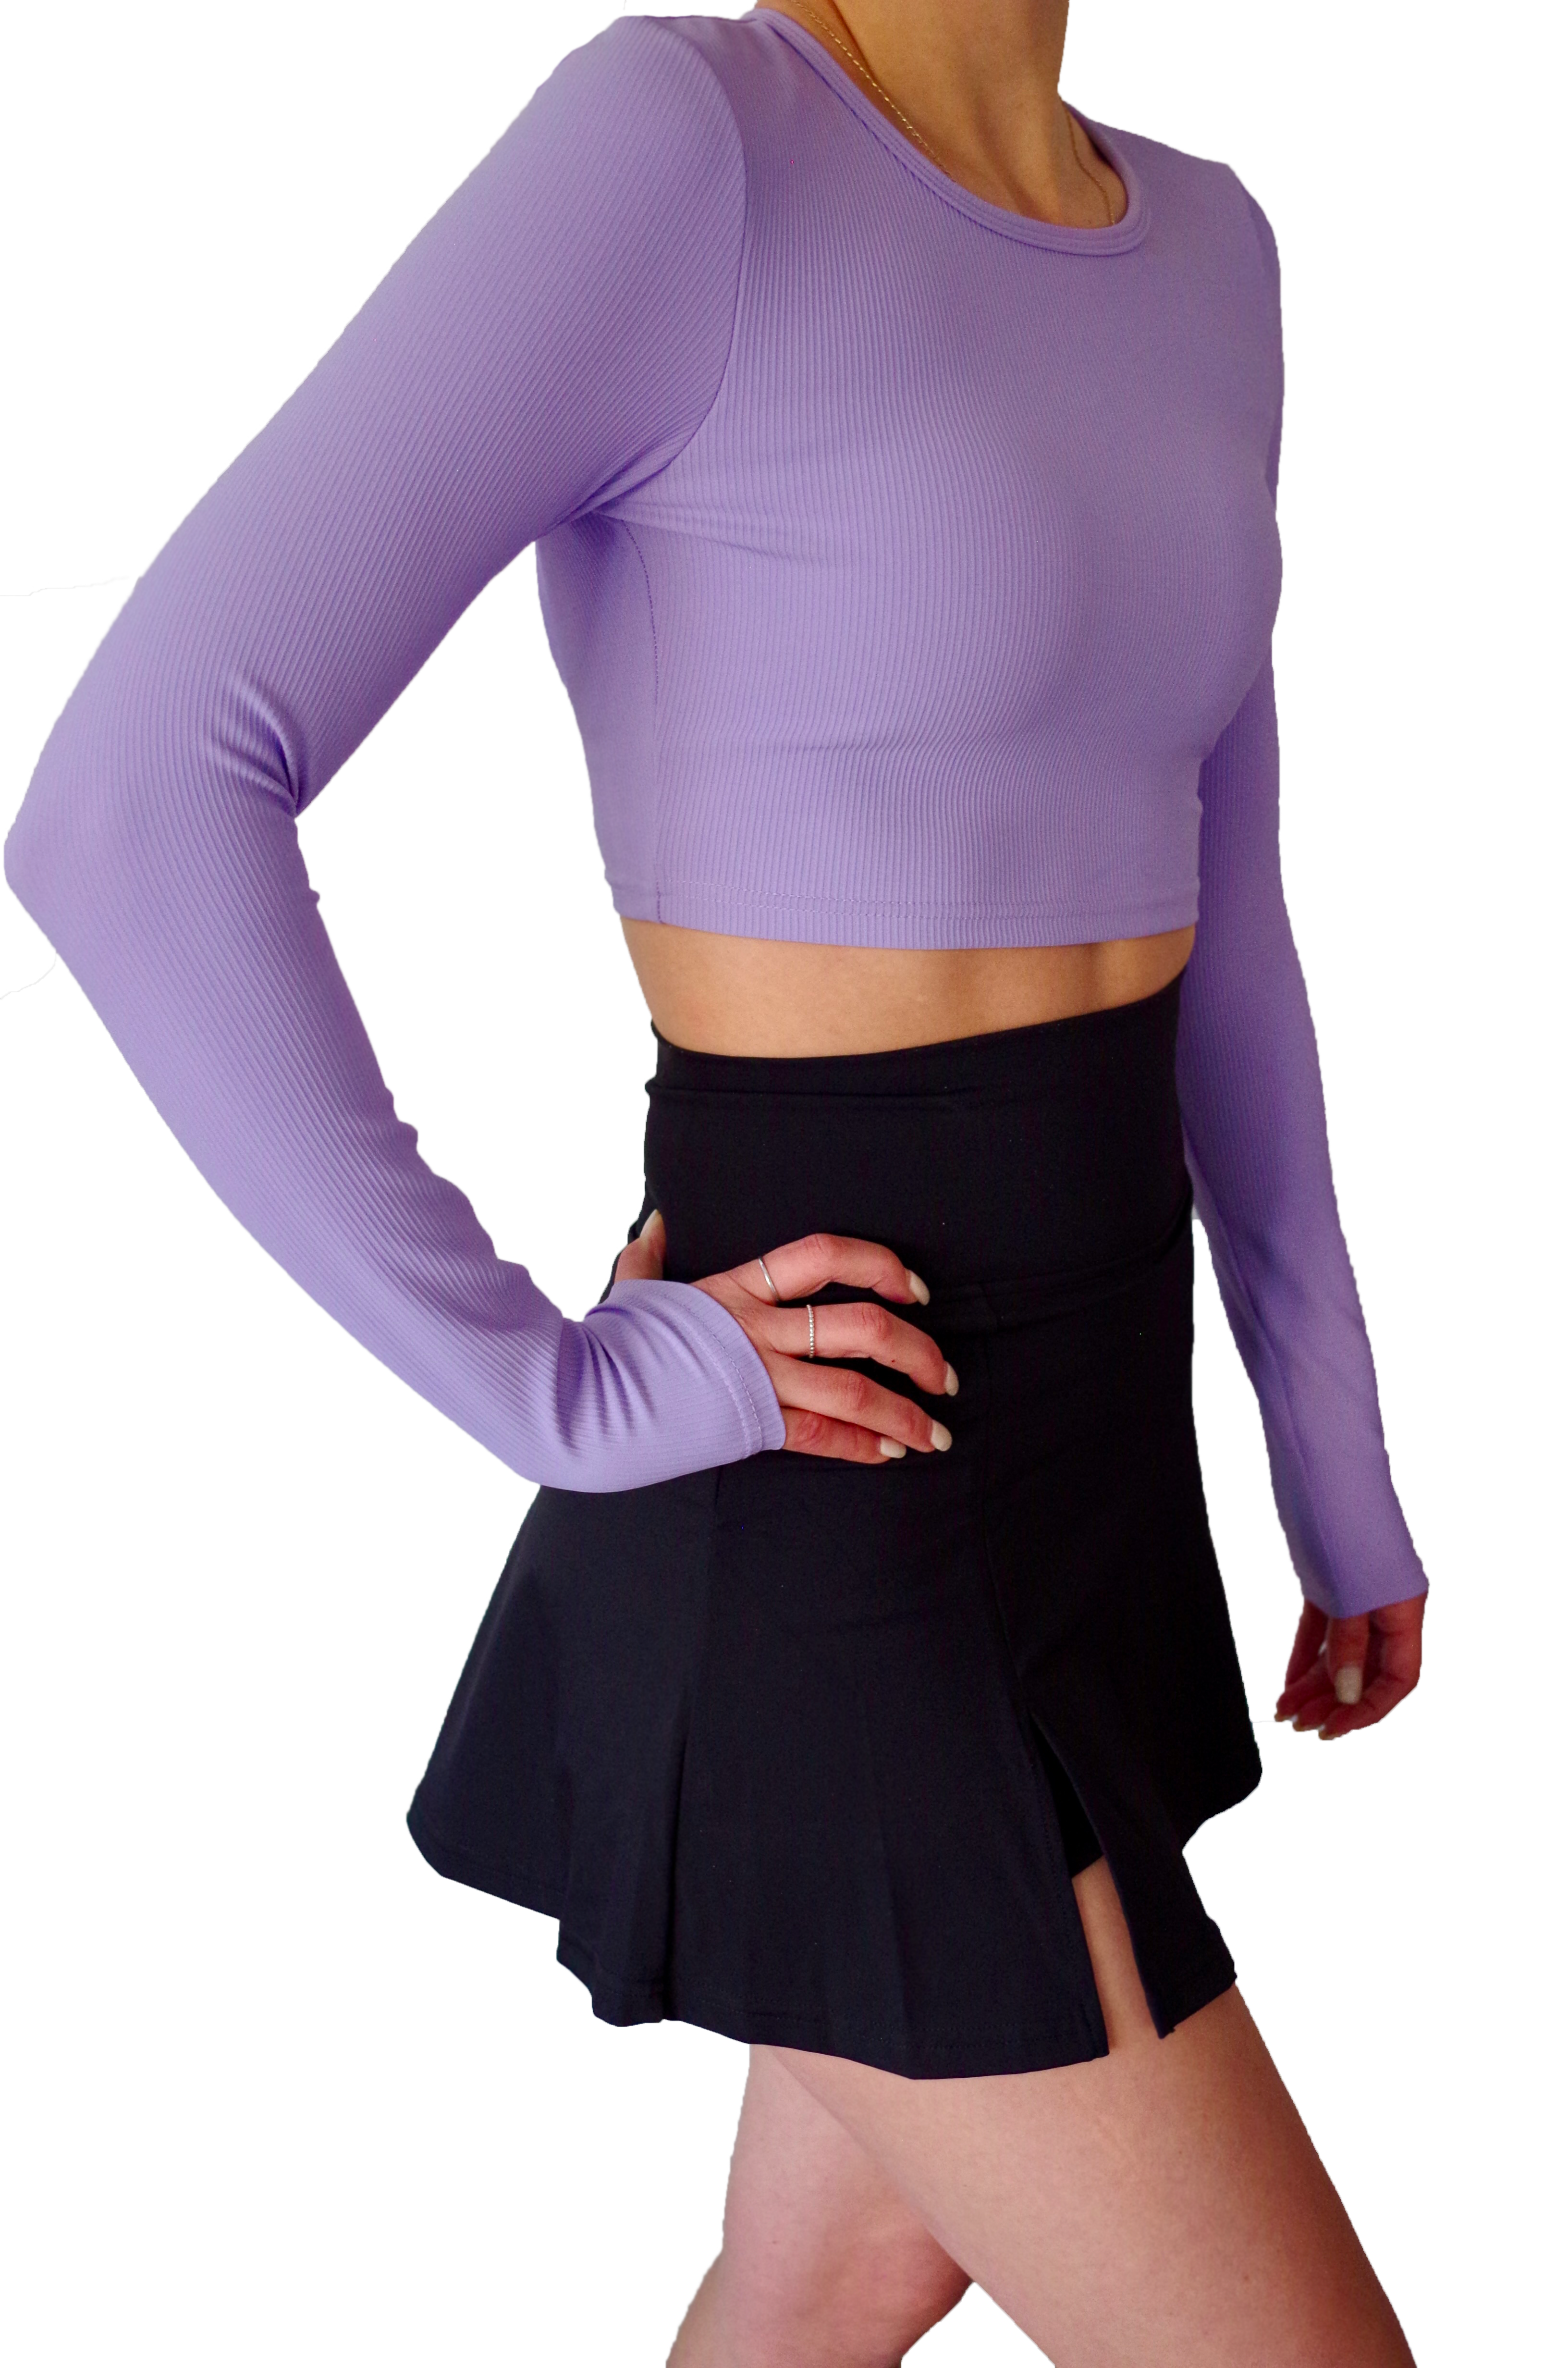 Triangle Ice Skating Crop Top